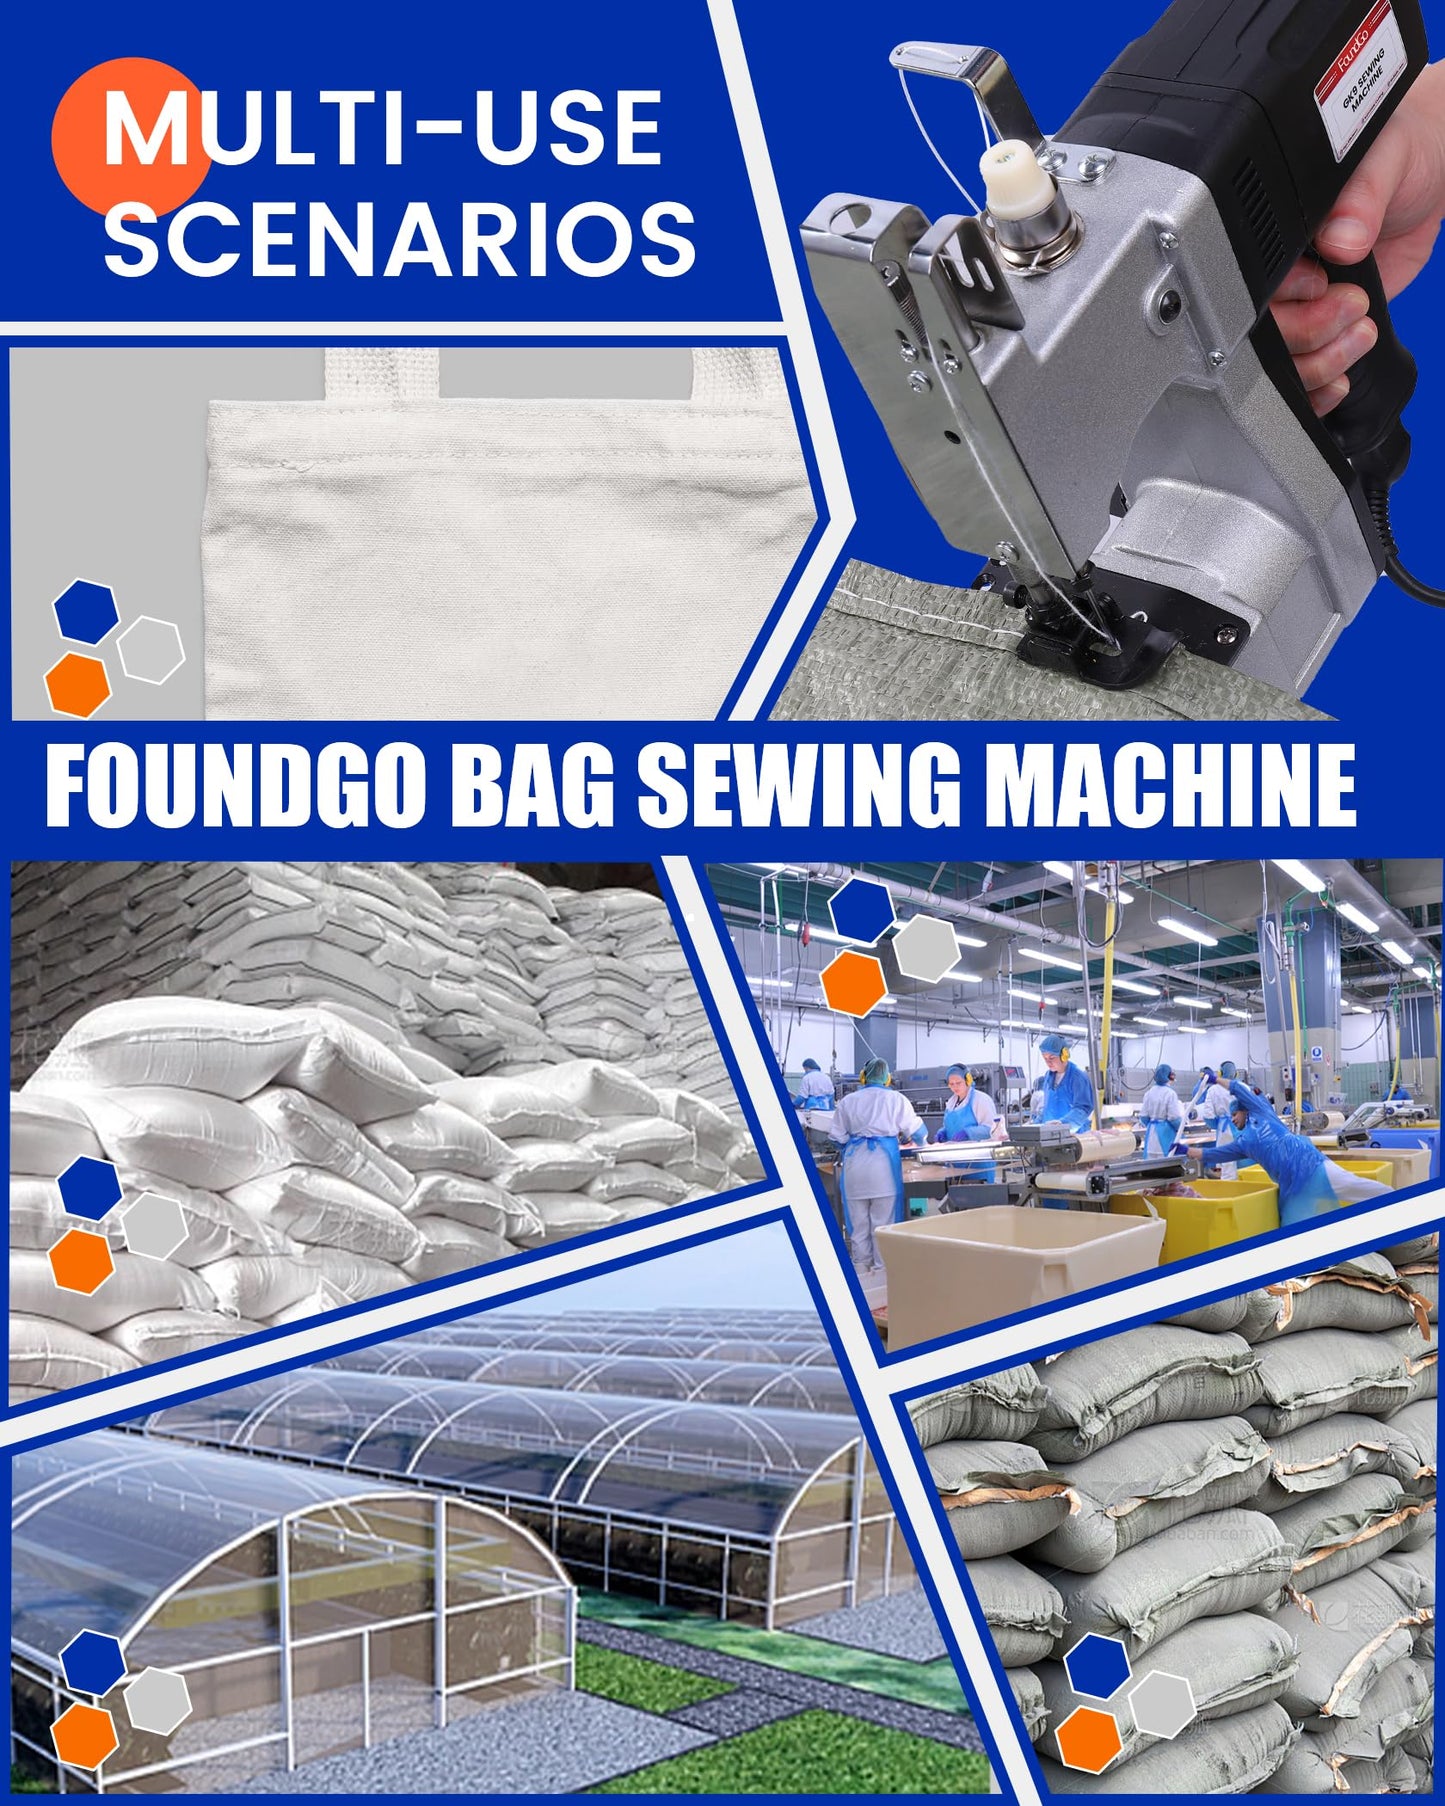 FoundGo Electric Bag Sewing Machine 2.5kg Portable Closer 2s/bag Closing Handheld Sewer 110v 210W Lightweight for Stitching Cowhide Bags/Towels/Leather/Non-woven Ideal